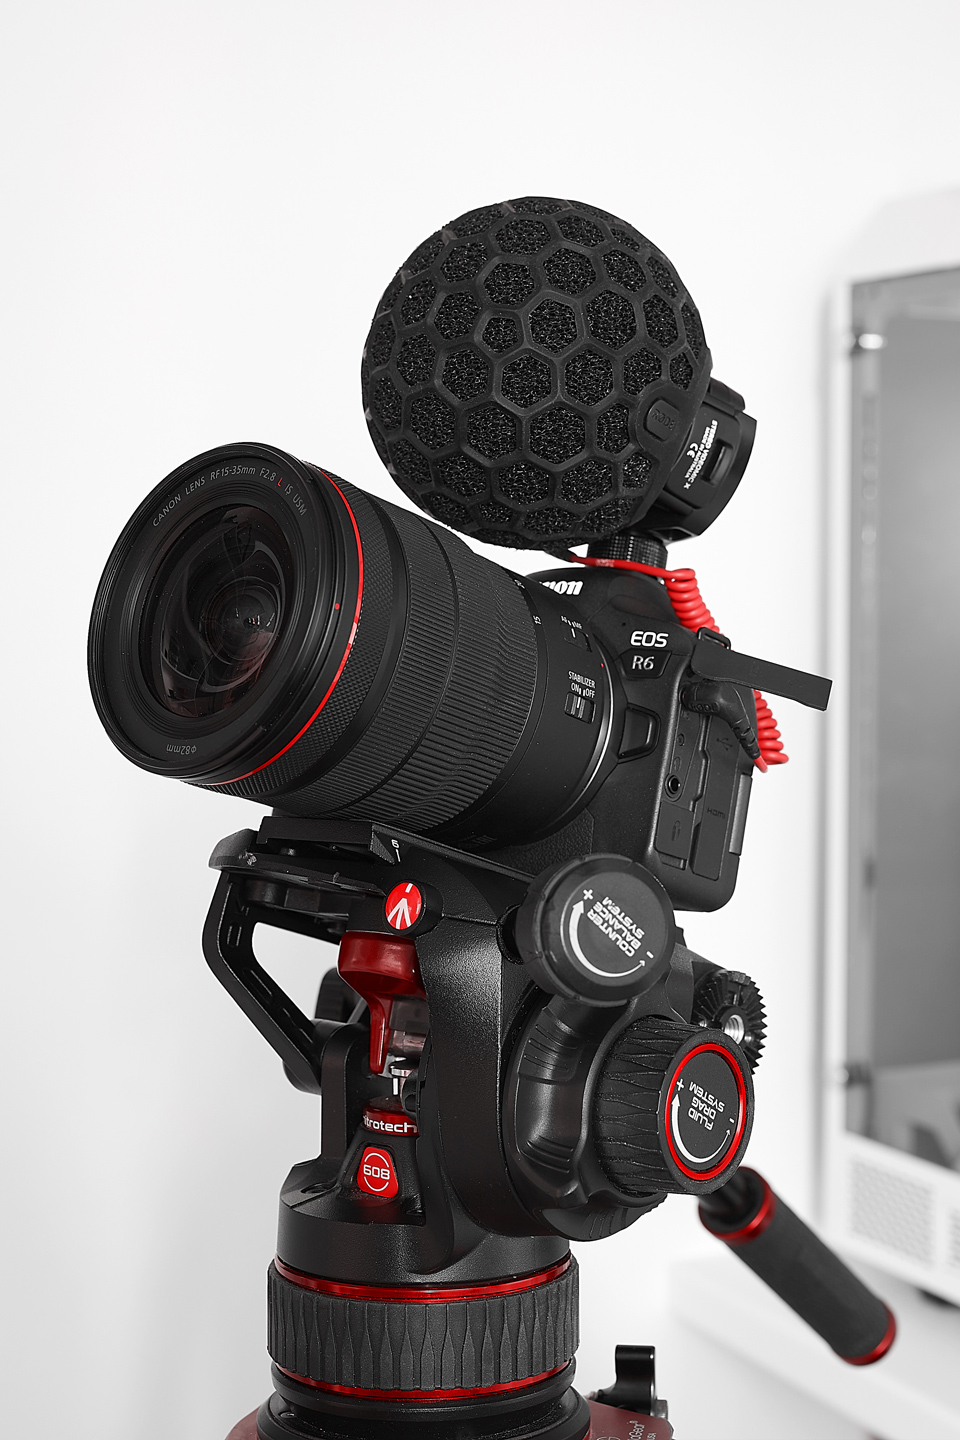 New Canon R5 and R6: find the best tripod head match!